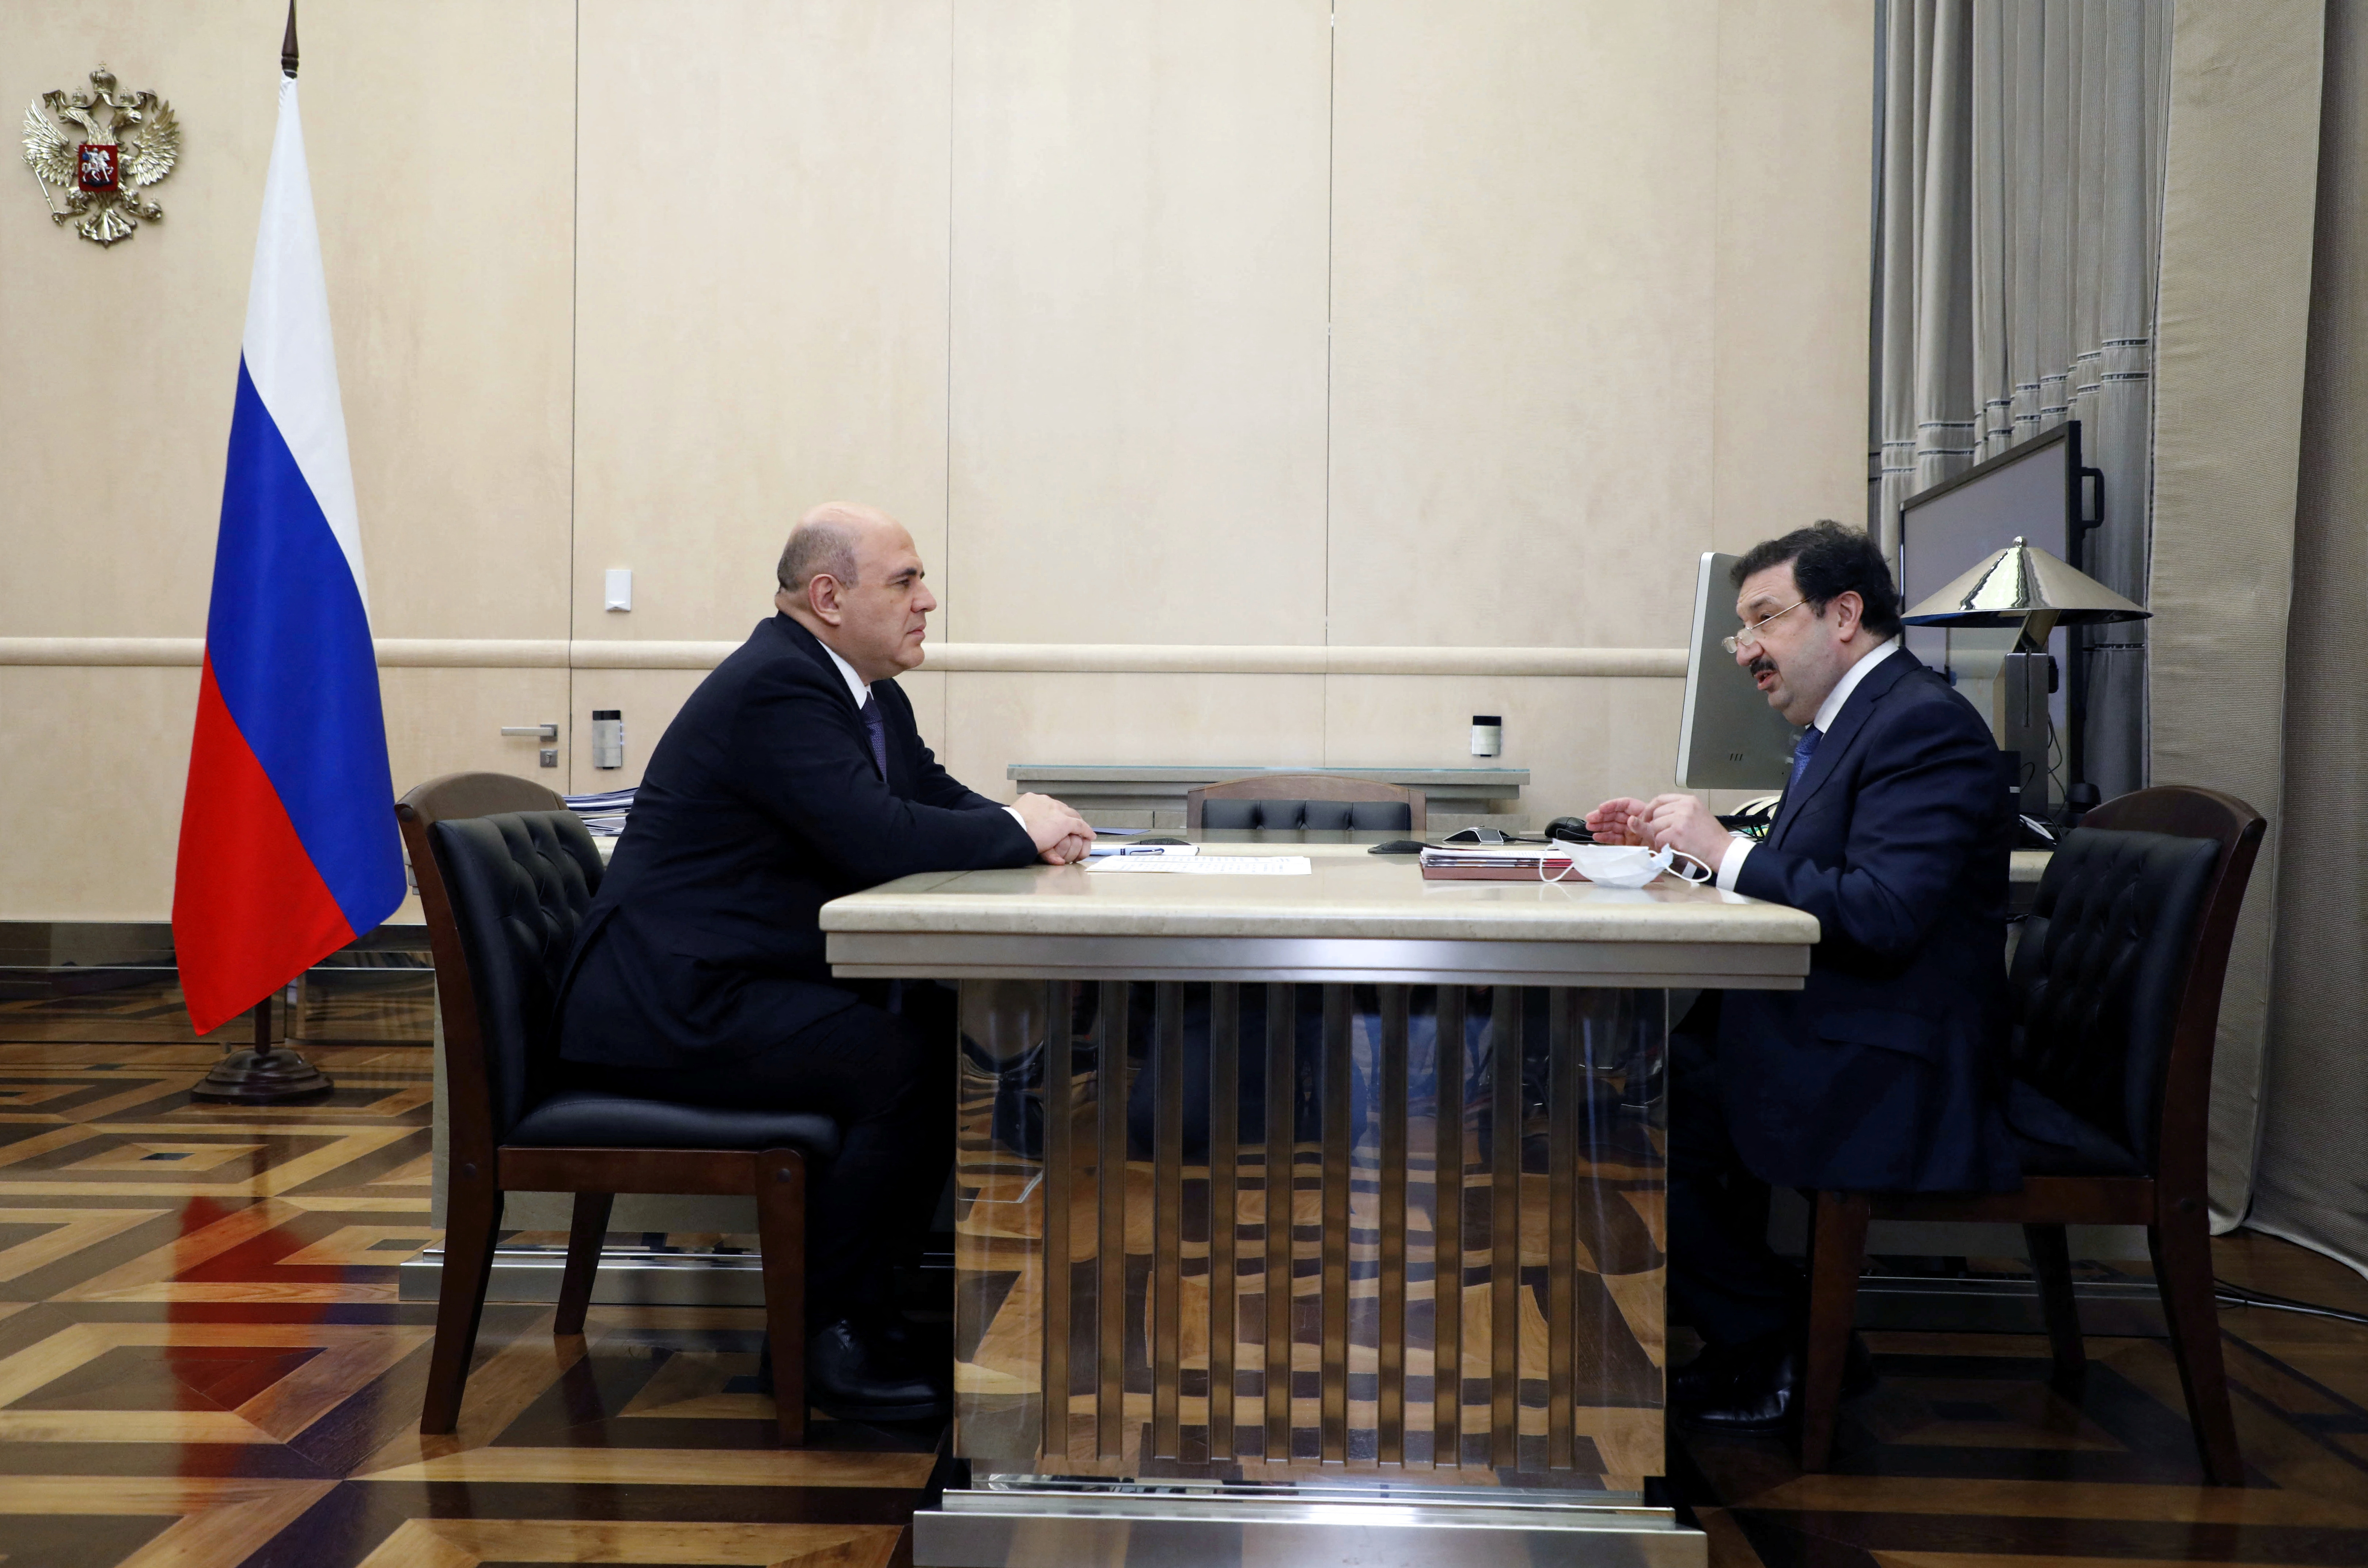 Russian Prime Minister Mikhail Mishustin meets with Rector of the Russian Presidential Academy of National Economy and Public Administration Vladimir Mau in Moscow